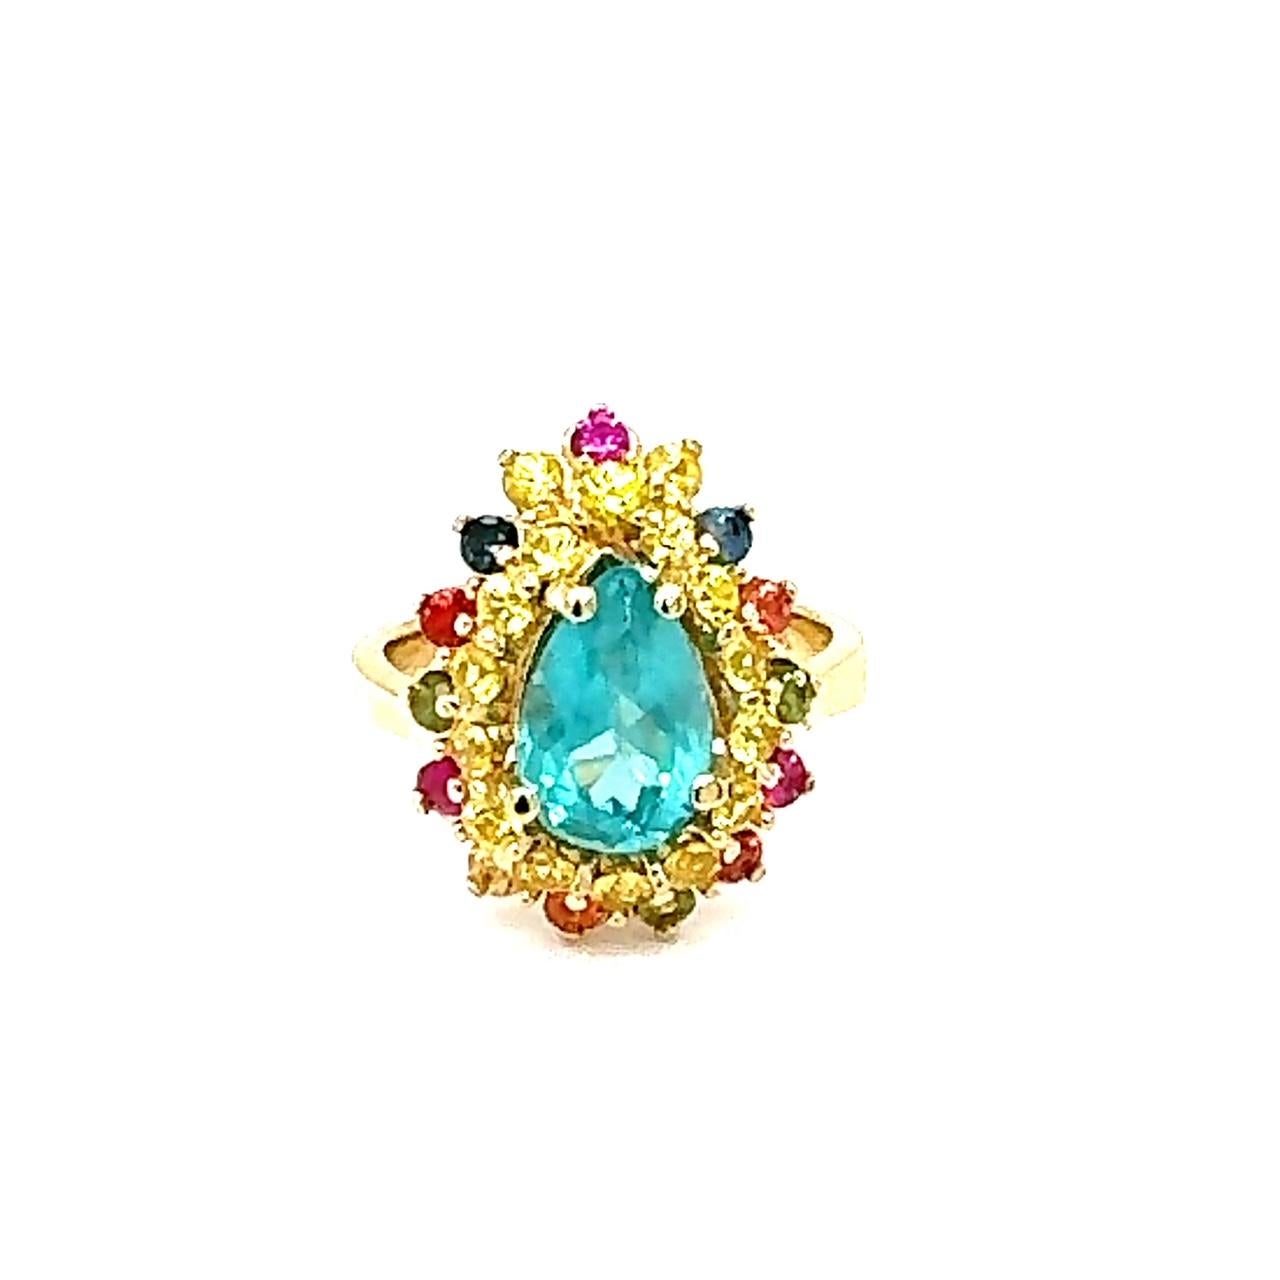 3.74 Carat Natural Apatite Sapphire Yellow Gold Cocktail Ring

This ring has a 2.23 Carat Pear Cut Apatite in the center of the ring and is surrounded by 14 Round Cut Yellow Sapphires and 15 Round Cut Multi-Color Sapphires that weigh 1.51 Carats. 